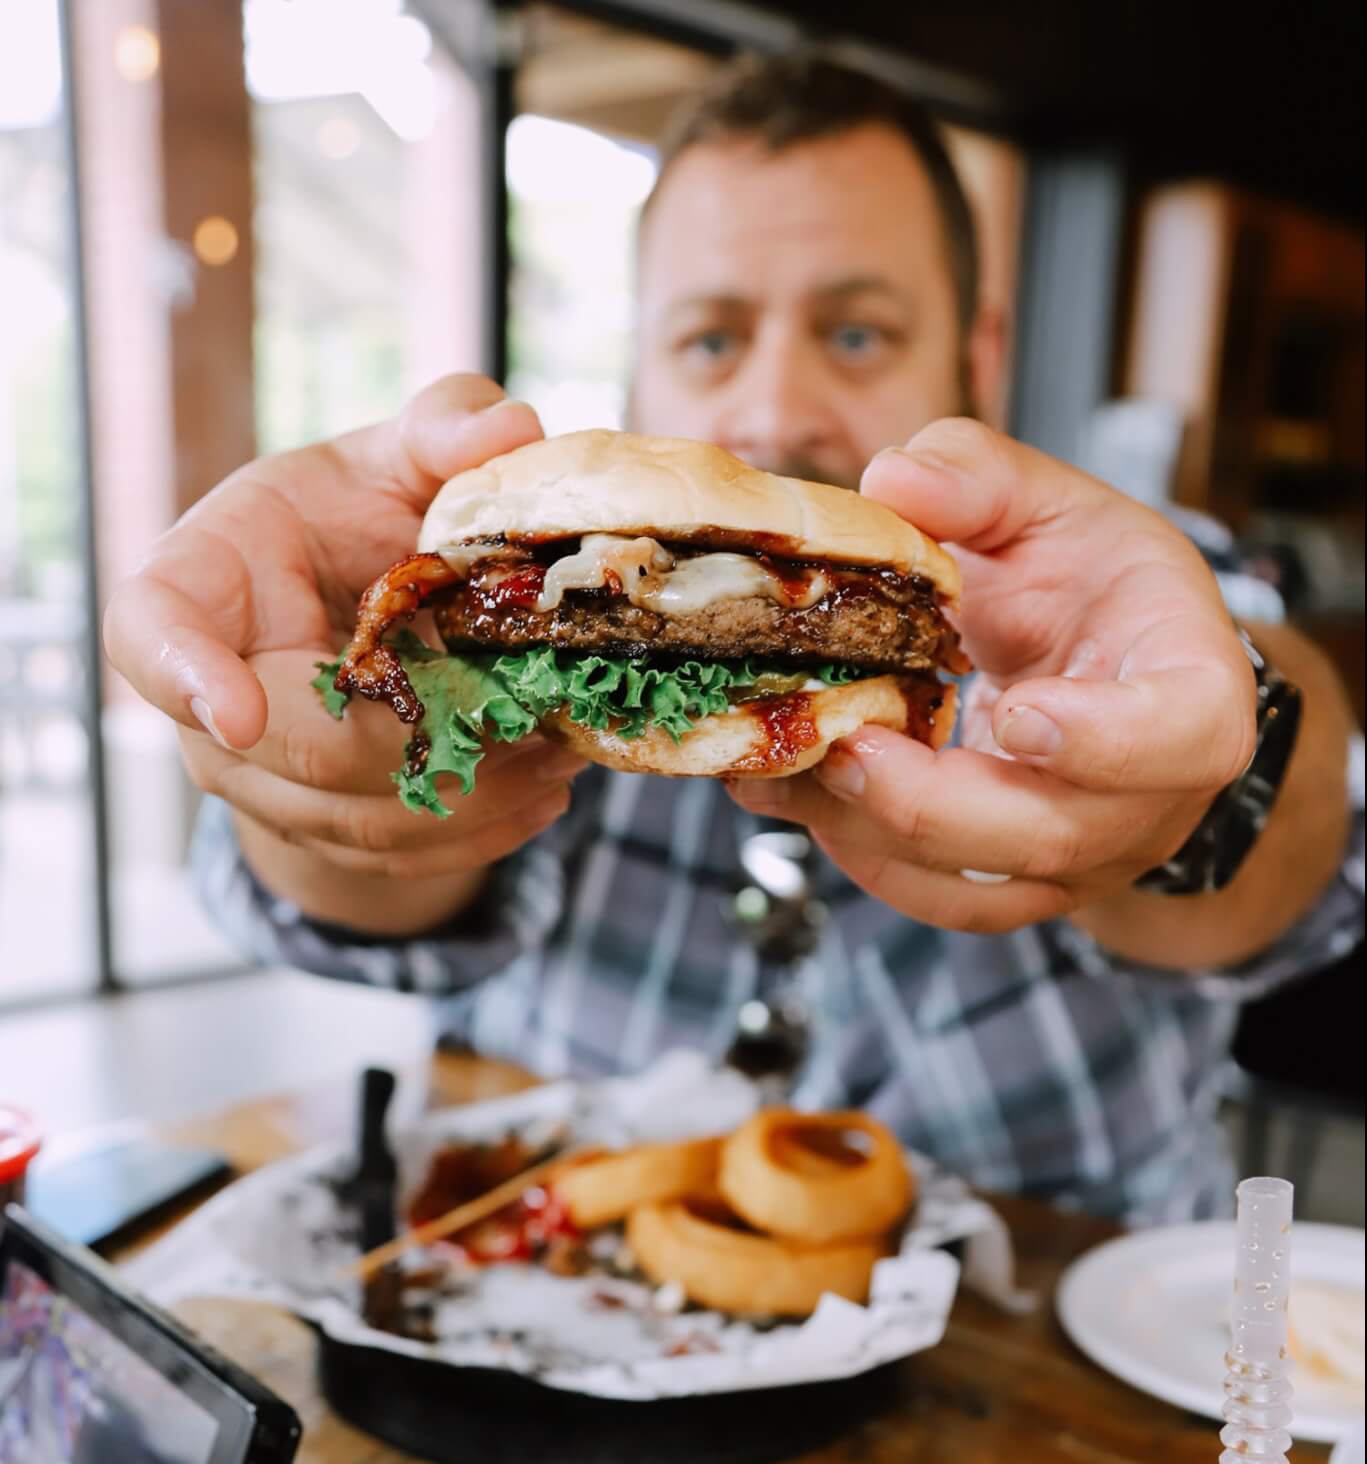 A man holds a hamburger up to the camera.